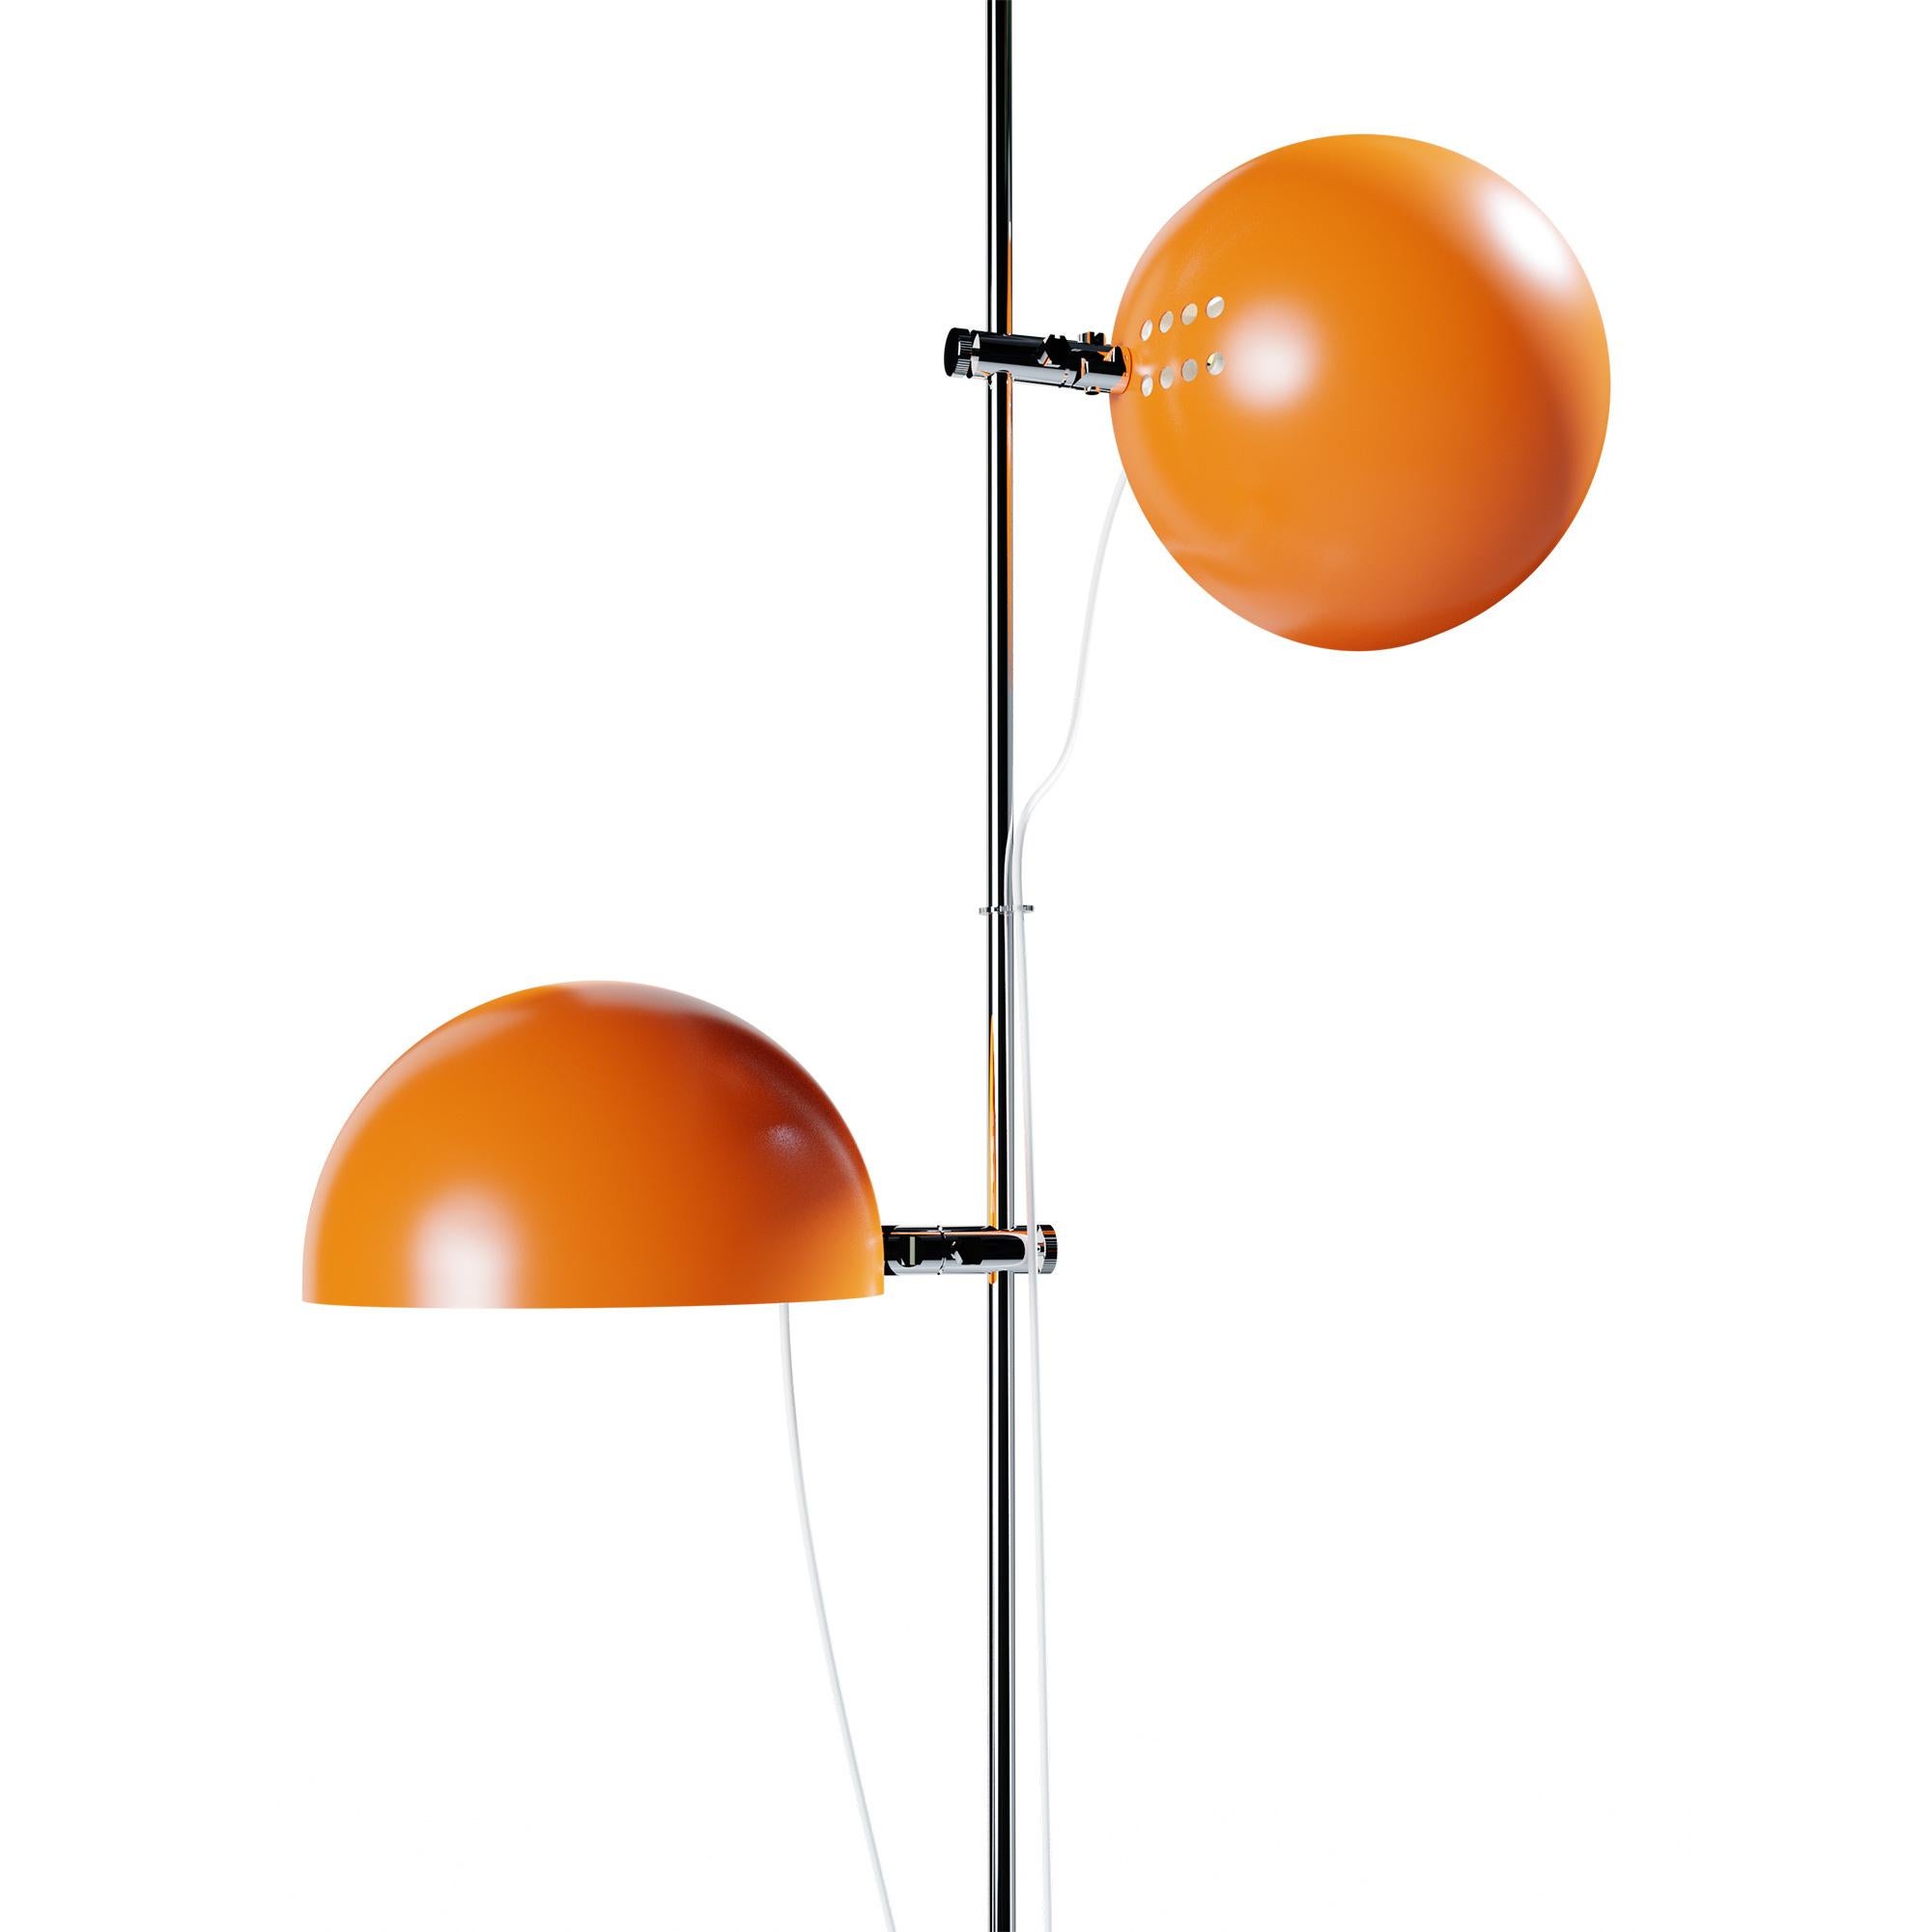 Alain Richard 'A23' metal and marble floor lamp for Disderot in Orange.

Executed in orange painted metal with a marble base, this newly produced numbered edition with included certificate of authenticity is made in France by Disderot with many of